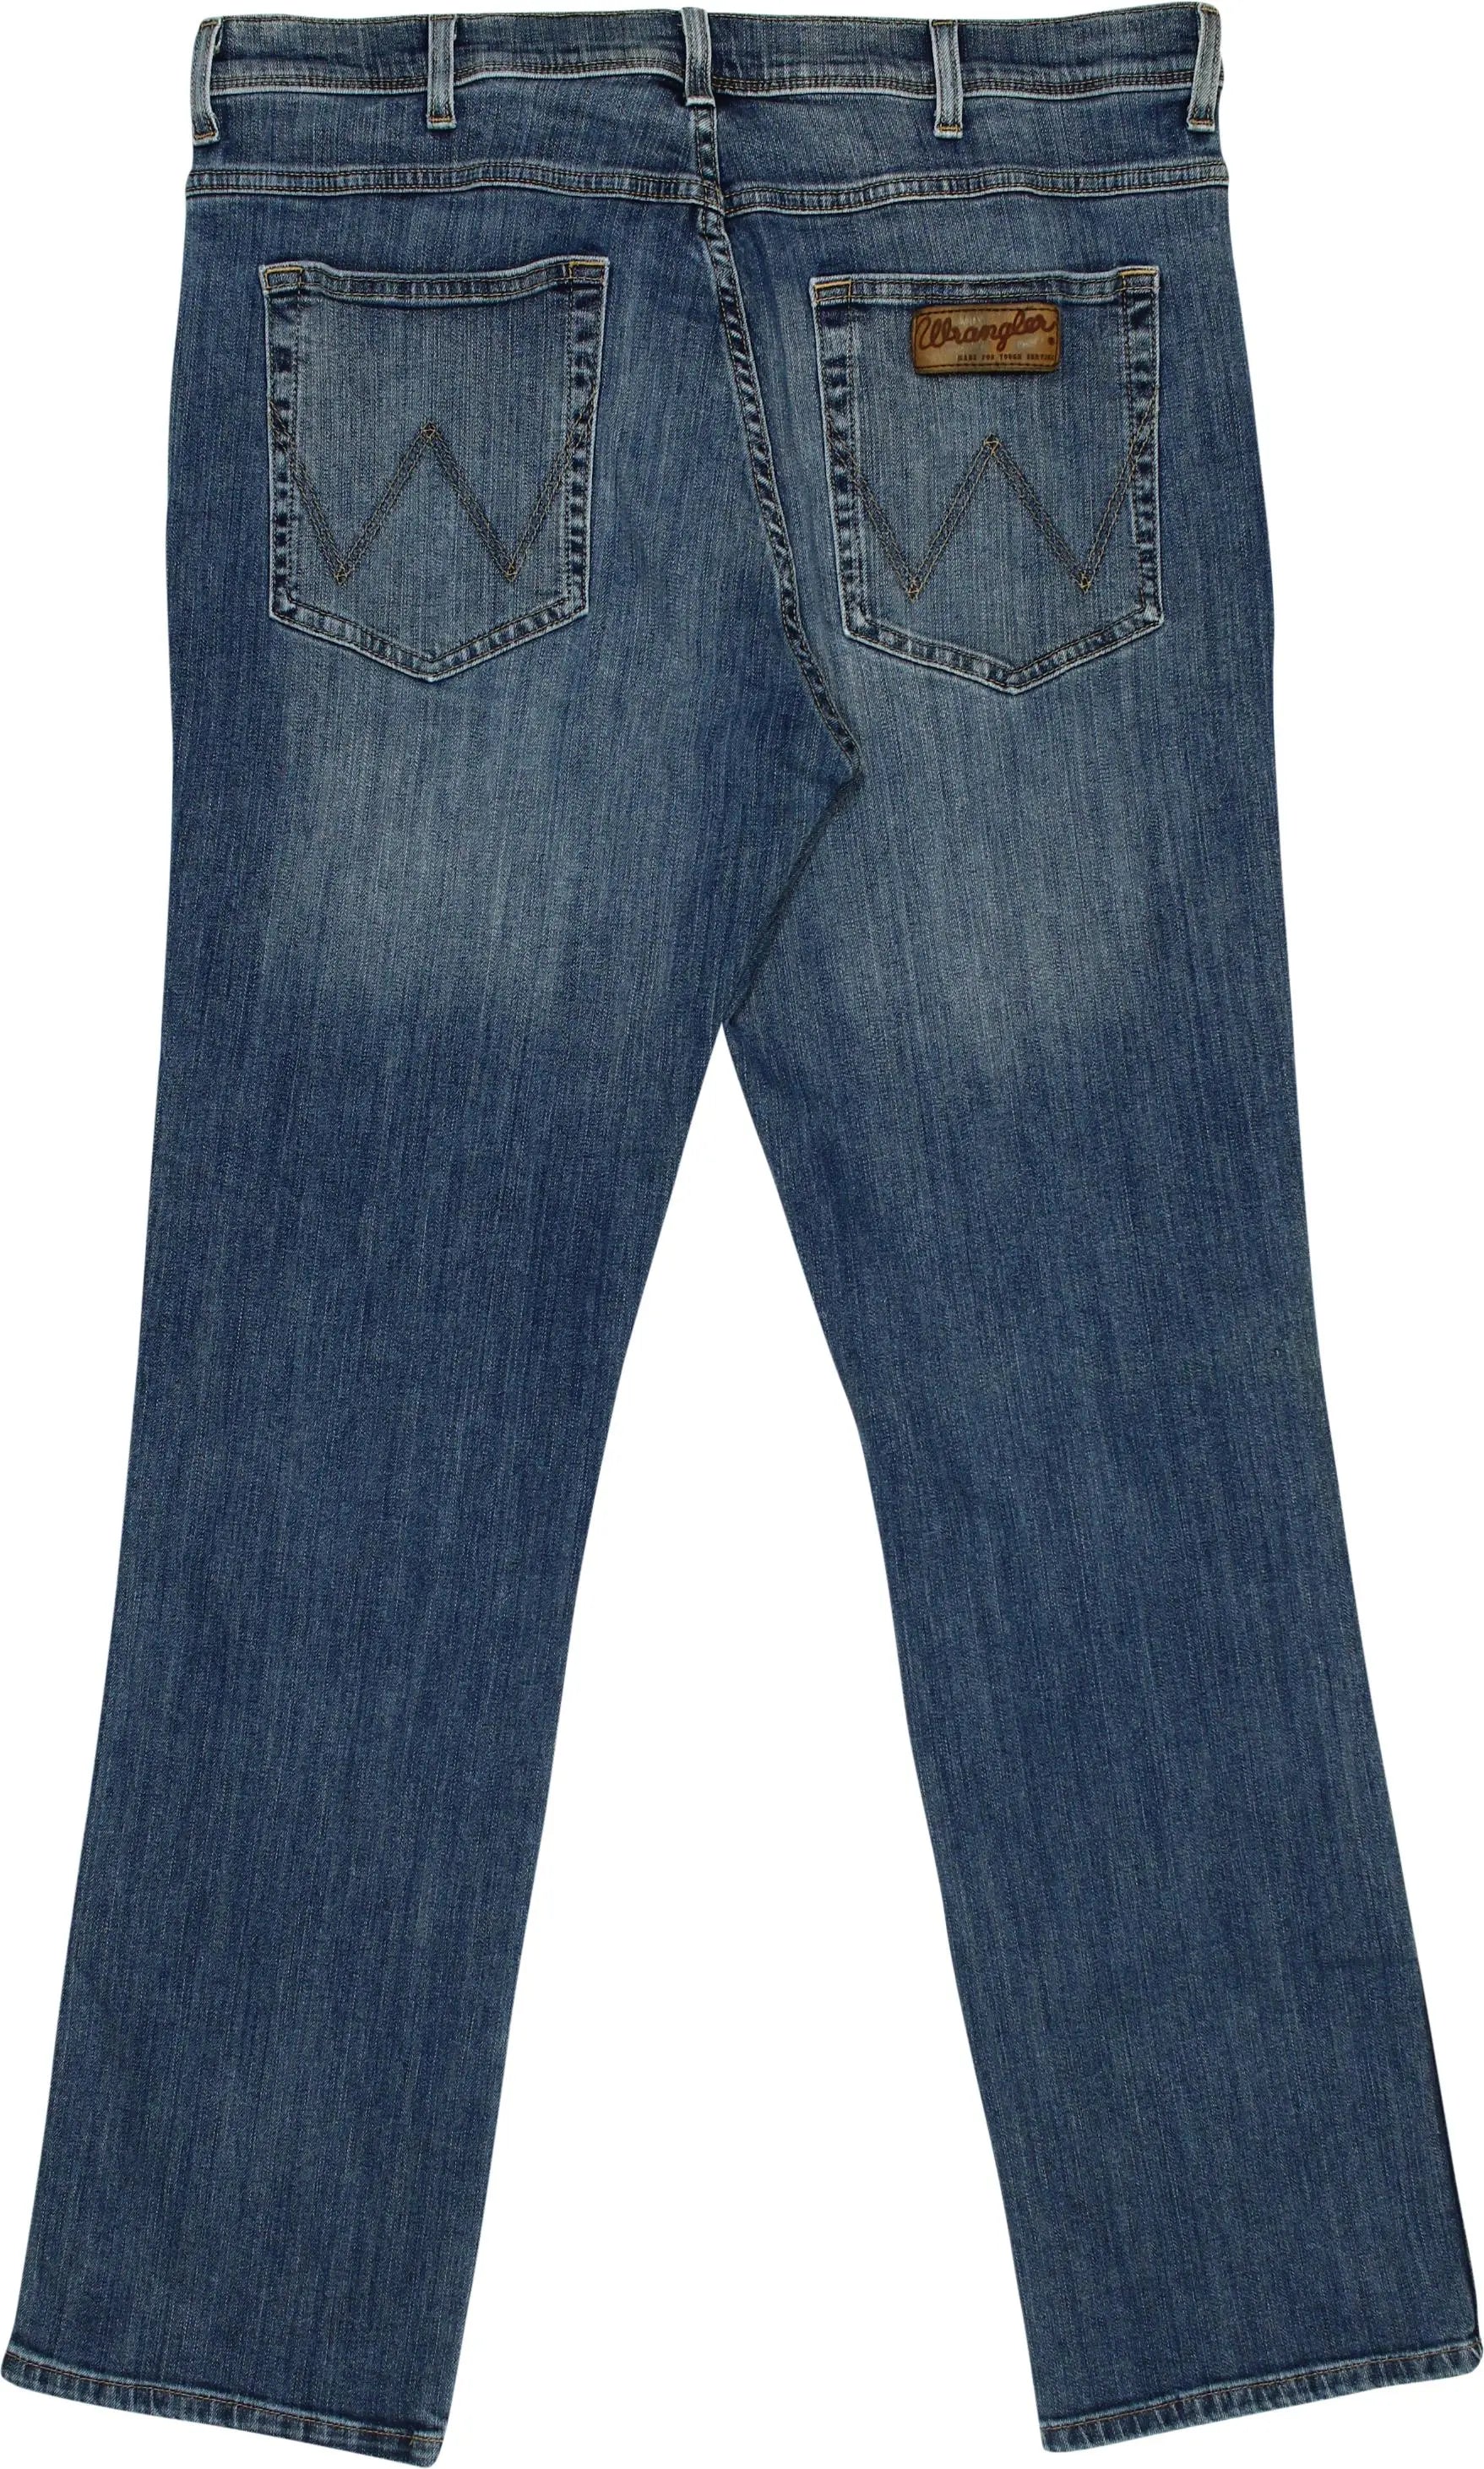 Wrangler - Arizona Stretch Jeans by Wrangler- ThriftTale.com - Vintage and second handclothing